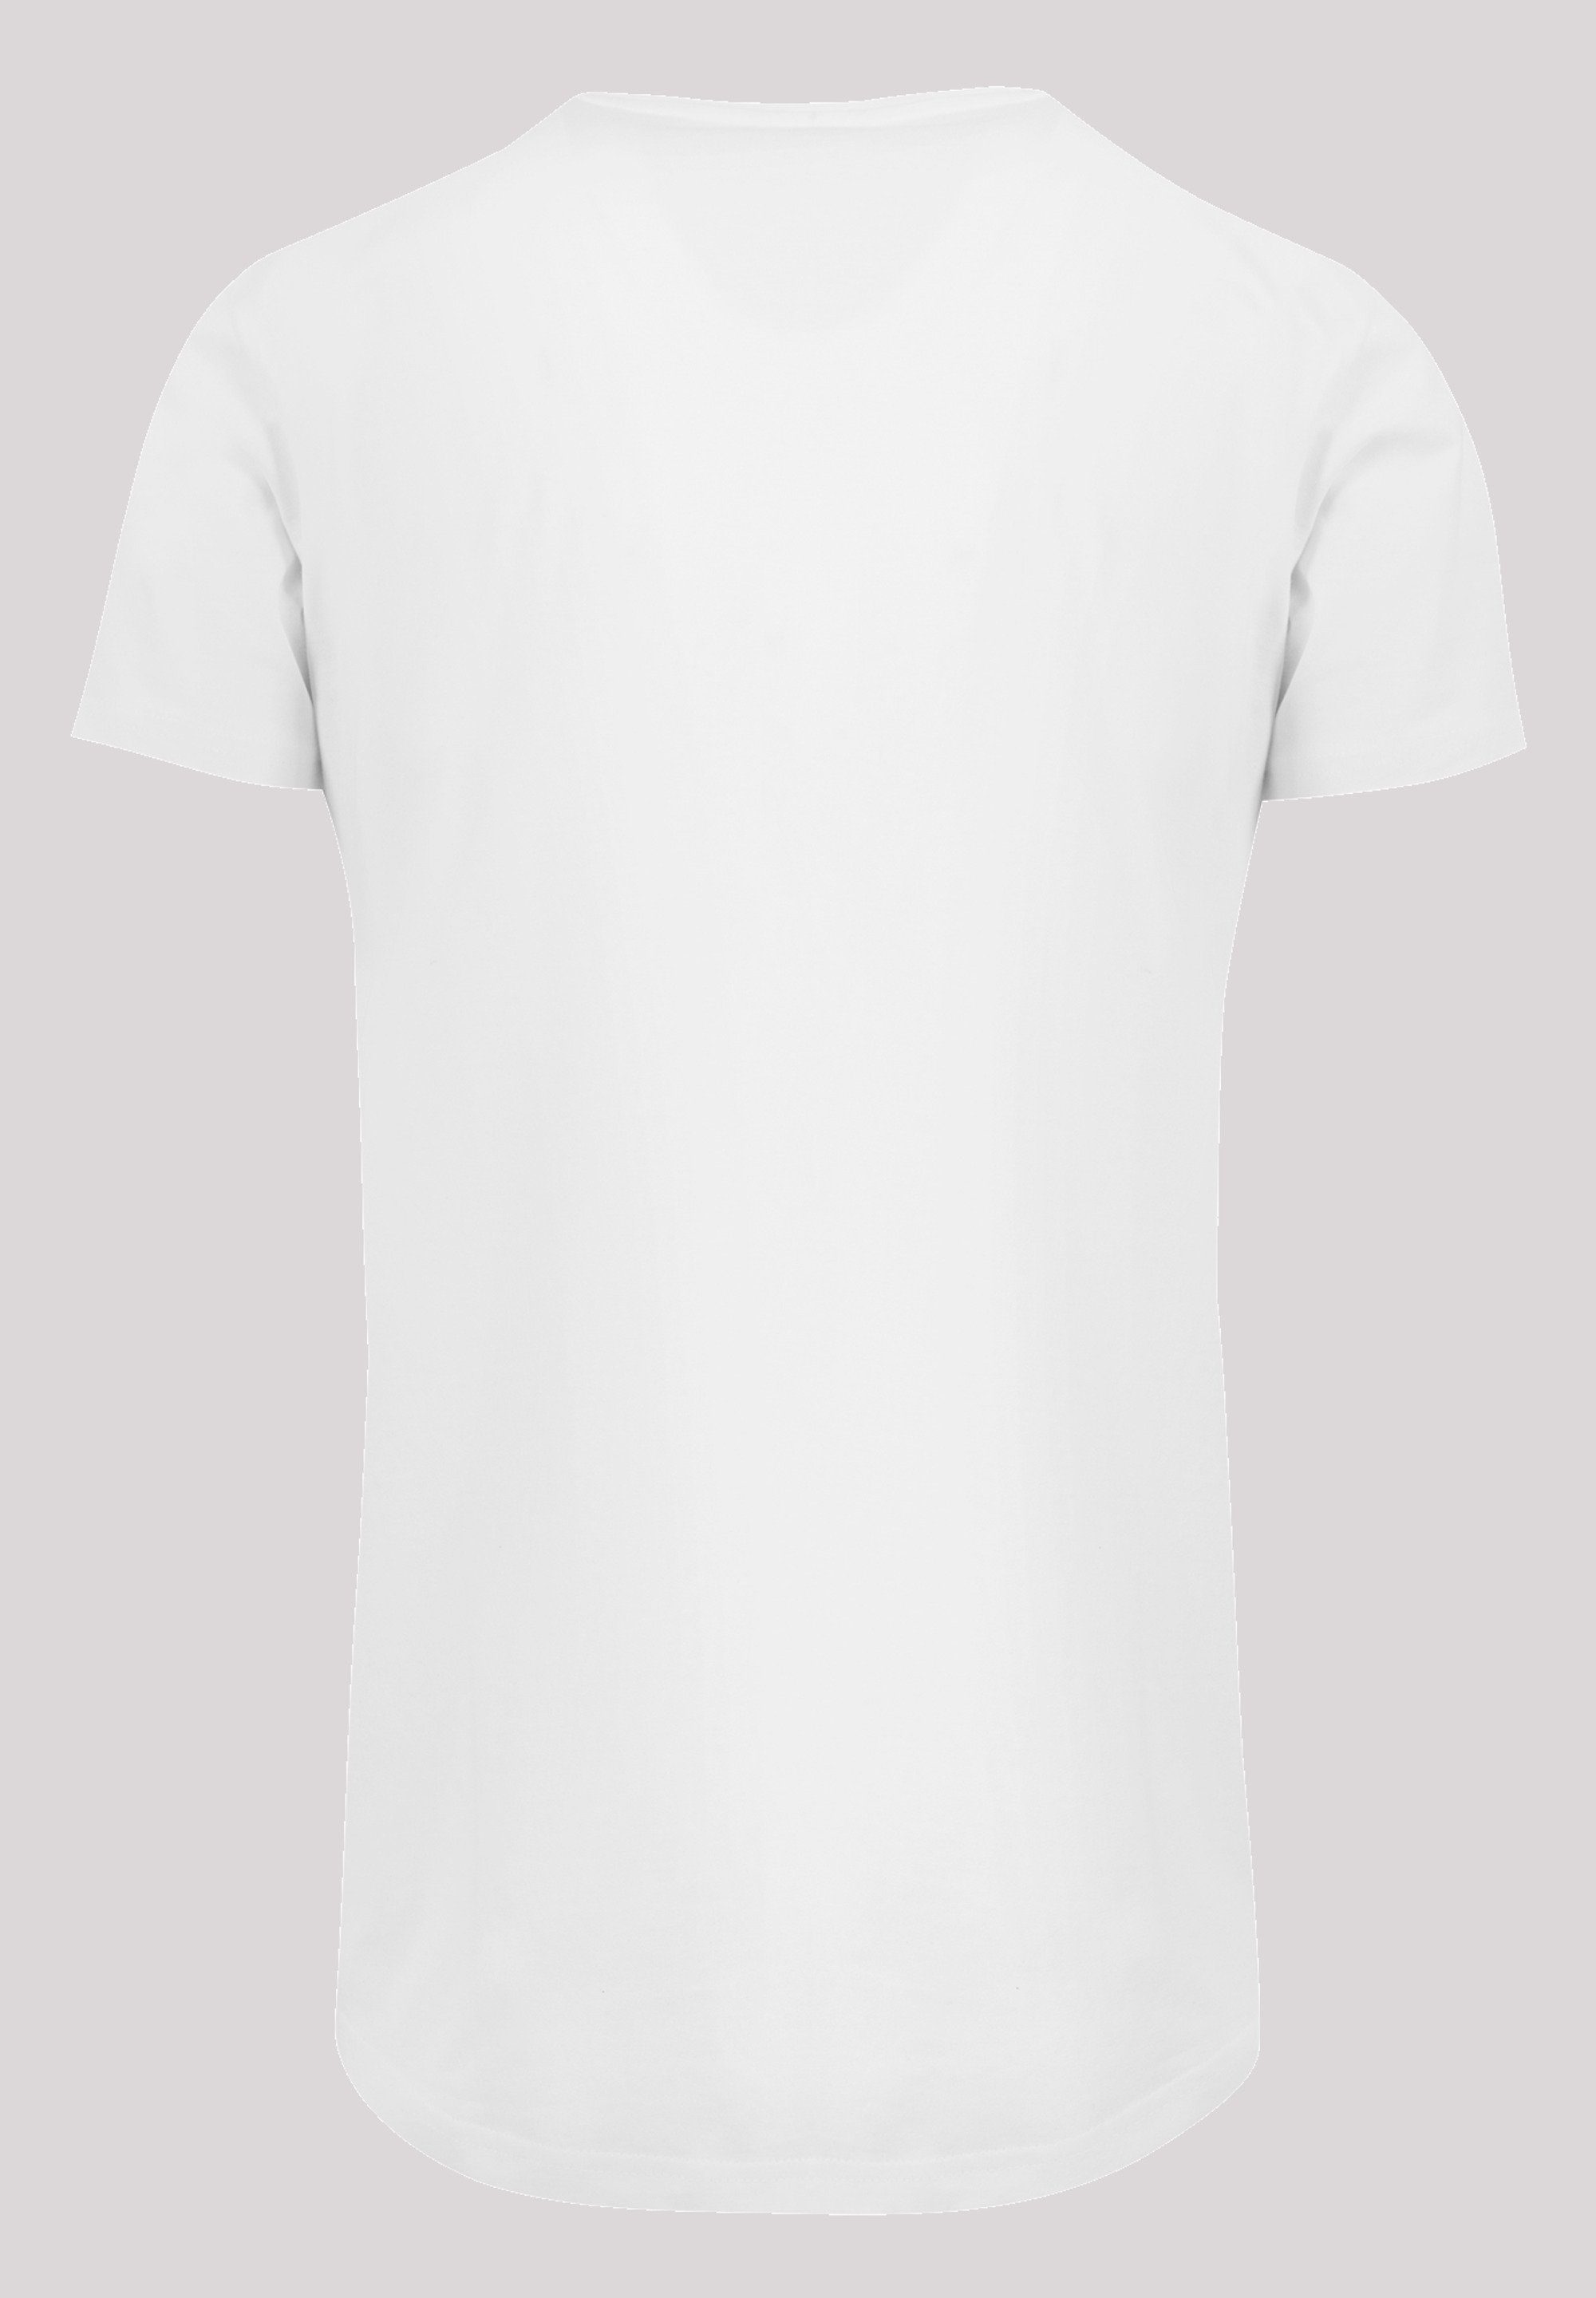 Marvin Shaped Long white Kurzarmshirt (1-tlg) Tee Martian with The Herren Face F4NT4STIC